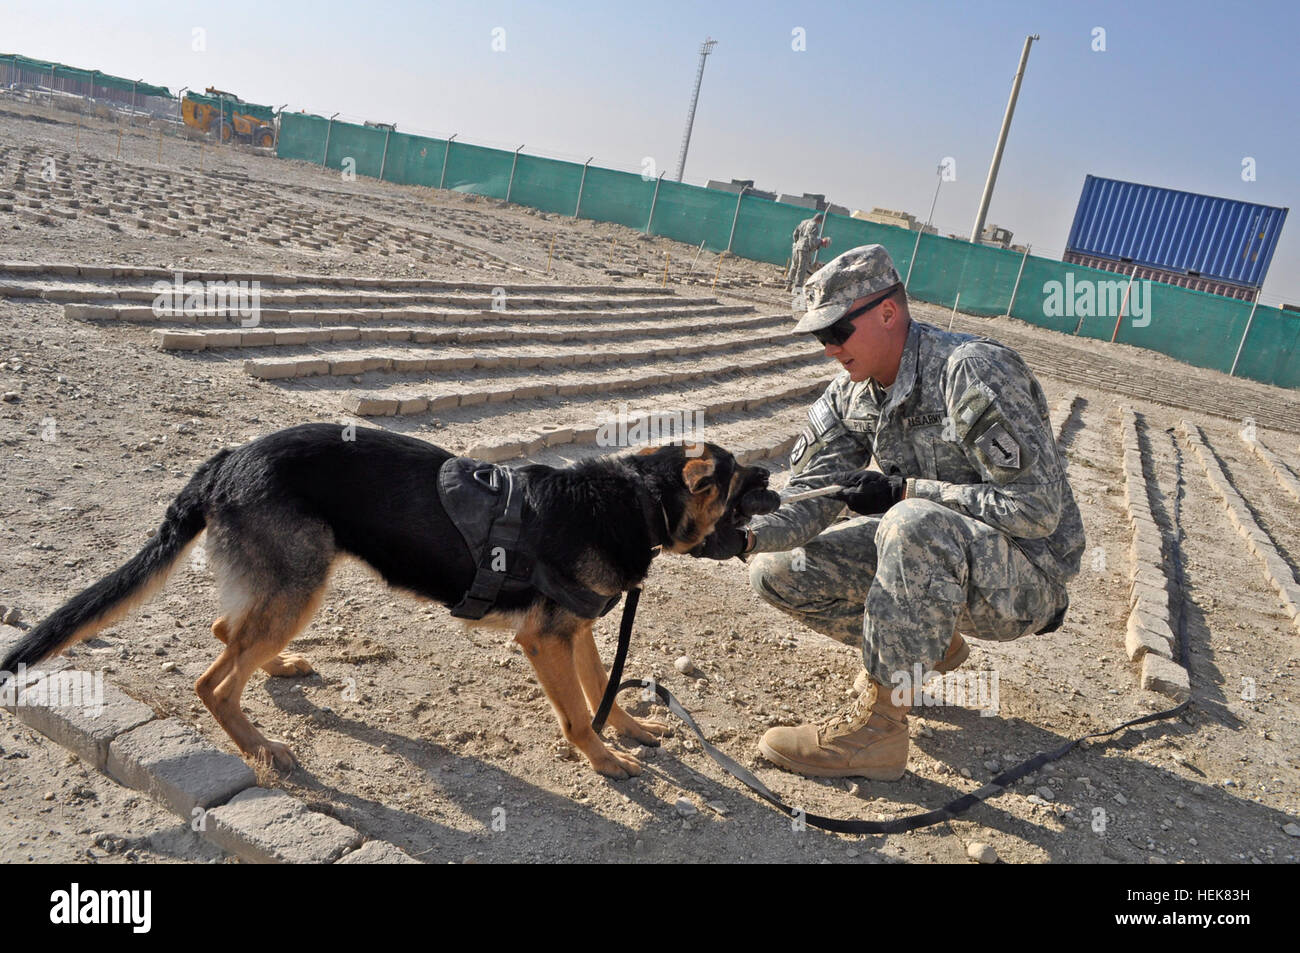 PARWAN PROVINCE, Afghanistan – U.S. Army Sgt. Perry Pyle, a dog handler with 49th Mine Dog Detachment, 54th Engineer Battalion, Task Force Dolch and native of St. Louis, rewards his partner, Finta, with some play time for a job well done on mine-detection training lanes at Bagram Airfield Dec.15. The dogs are tested regularly to ensure they can maintain the high find rates required of mine detection dogs.  (Photo by U.S. Army Sgt. Robert Larson, Task Force Dolch) TF Dolch mine dog teams get ready for action 354208 Stock Photo